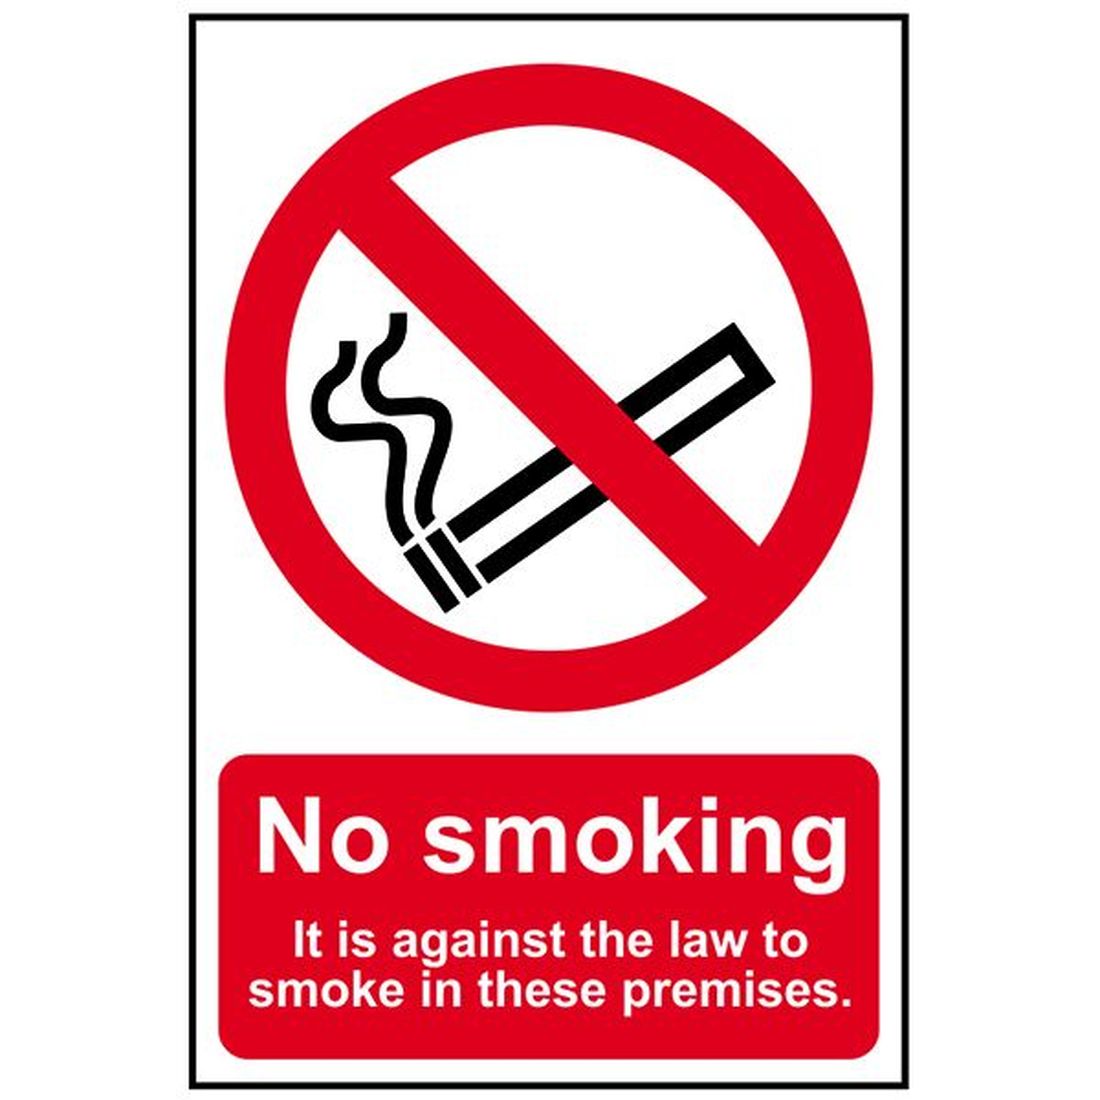 Scan No Smoking It Is Against The Law To Smoke In These Premises - PVC 200 x 300mm   